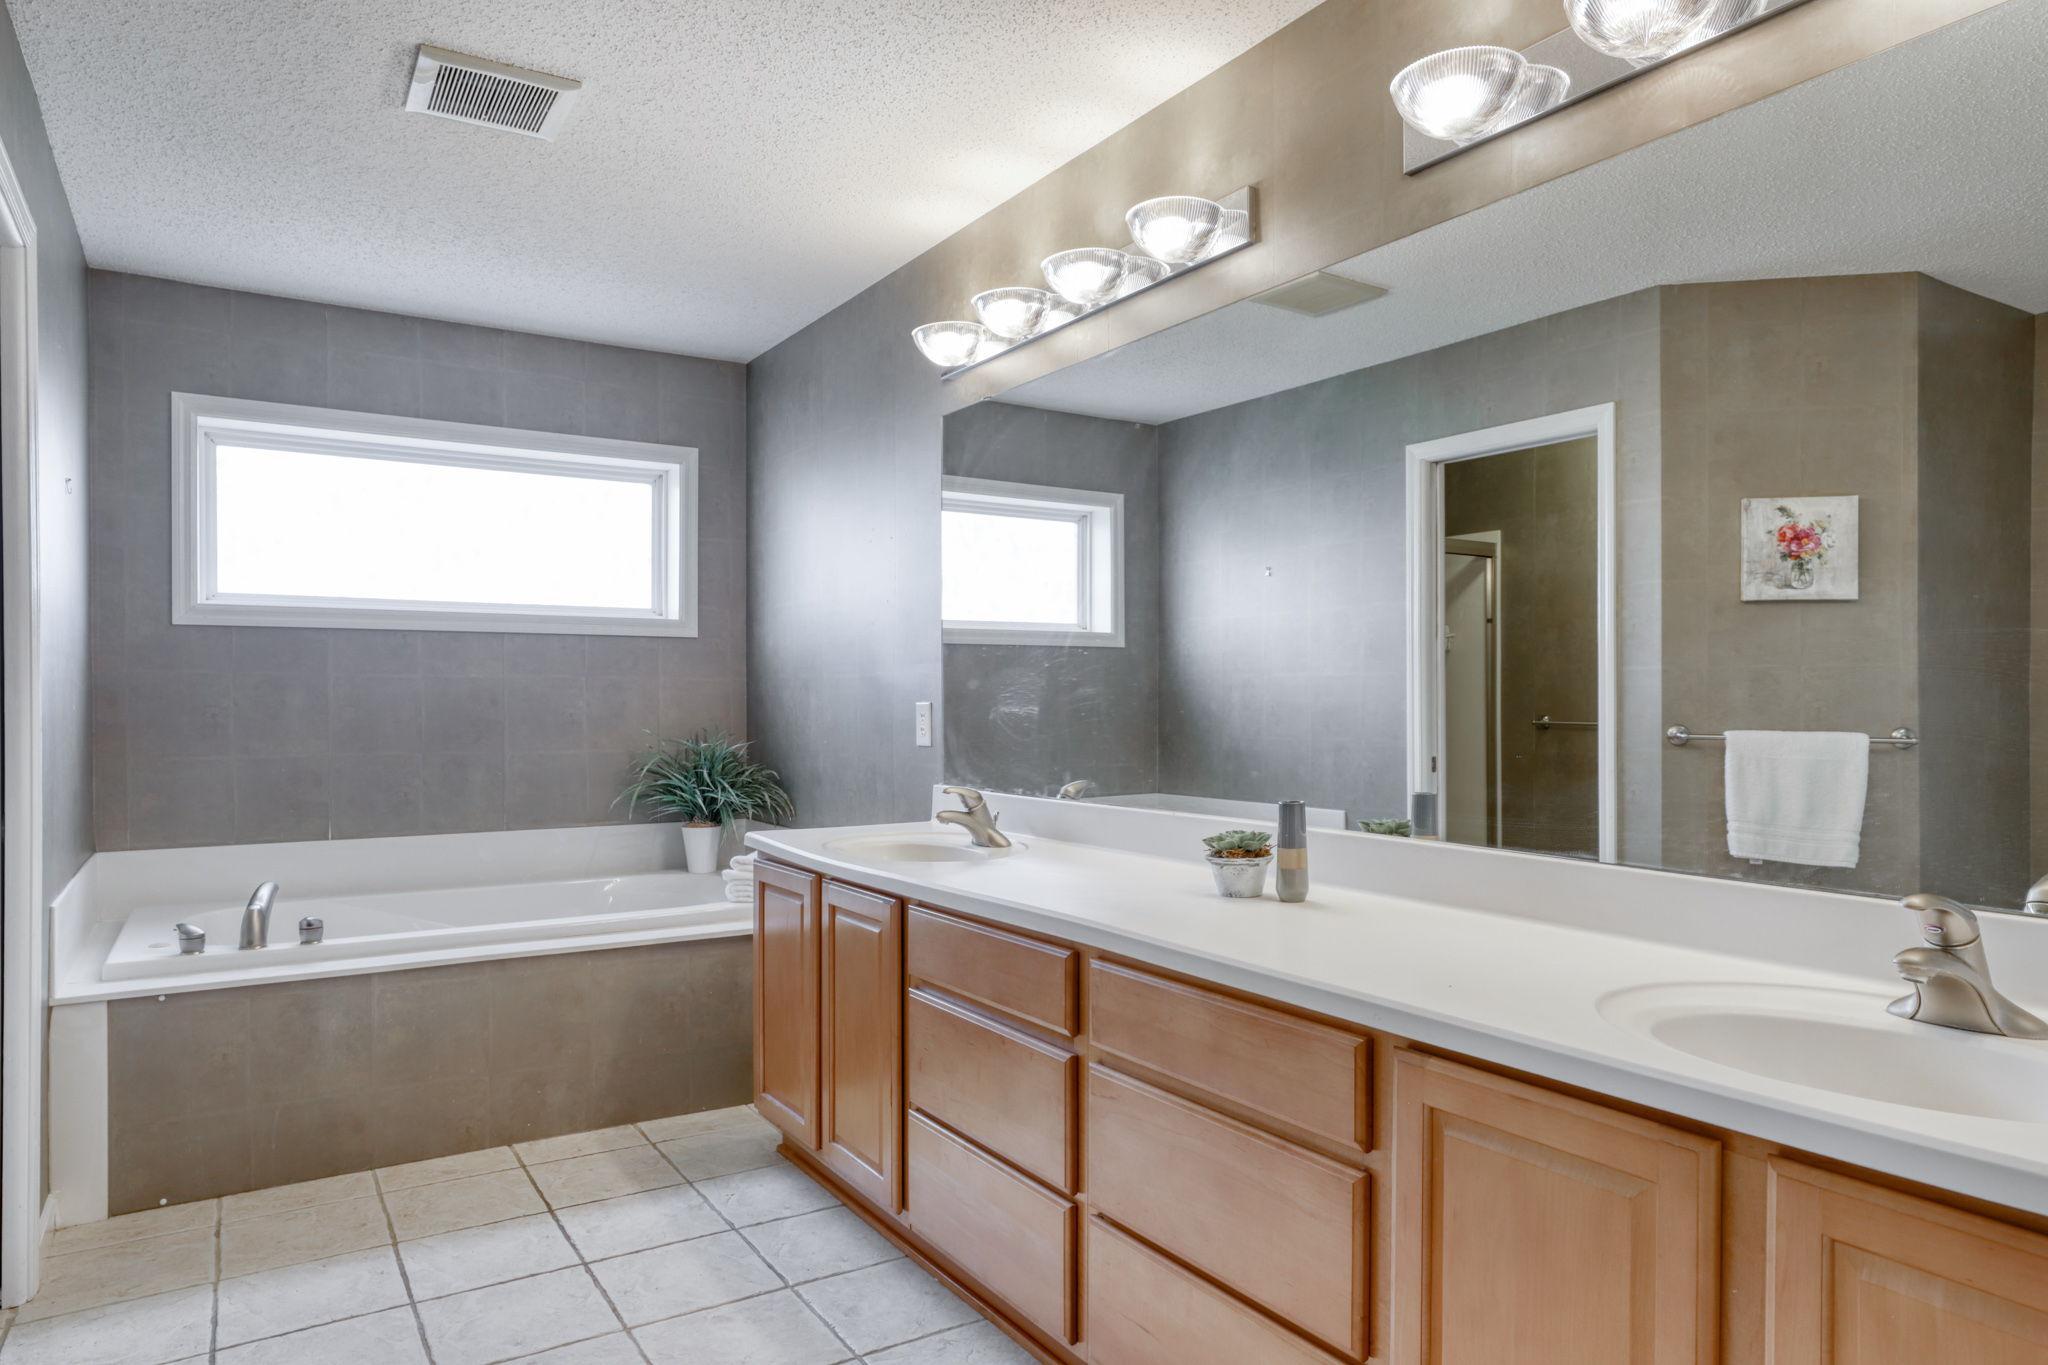 Owners' suite bath with double sinks, lots of counter space, jetted soaking tub and separate step-in shower.